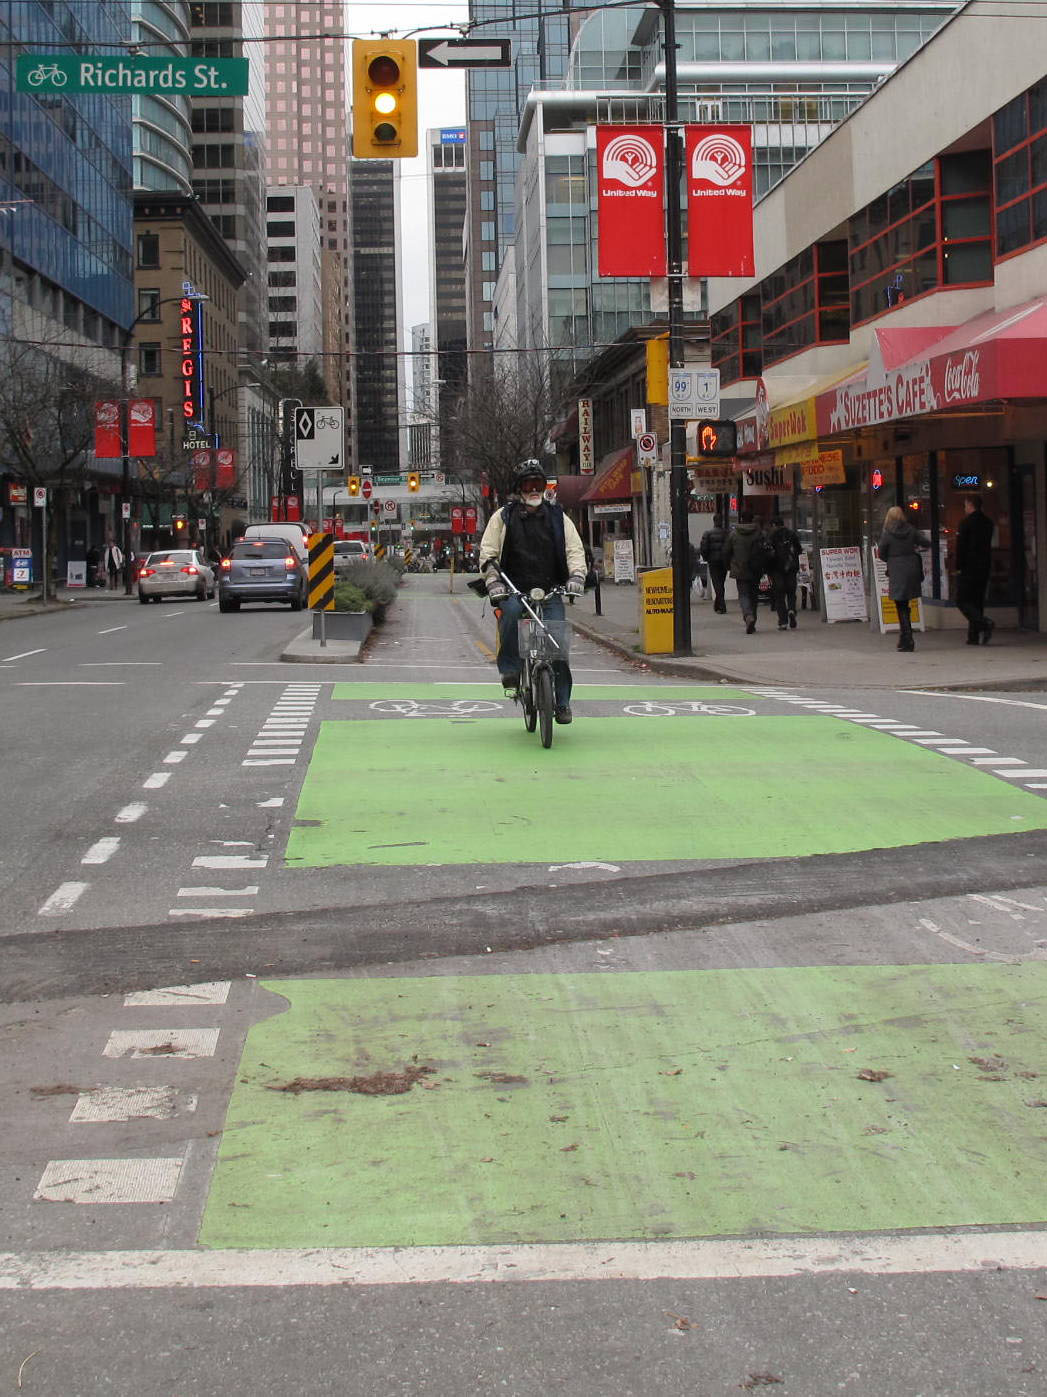 Fig. 31.25 A bike lane painted through an intersection in Vancouver, Canada.